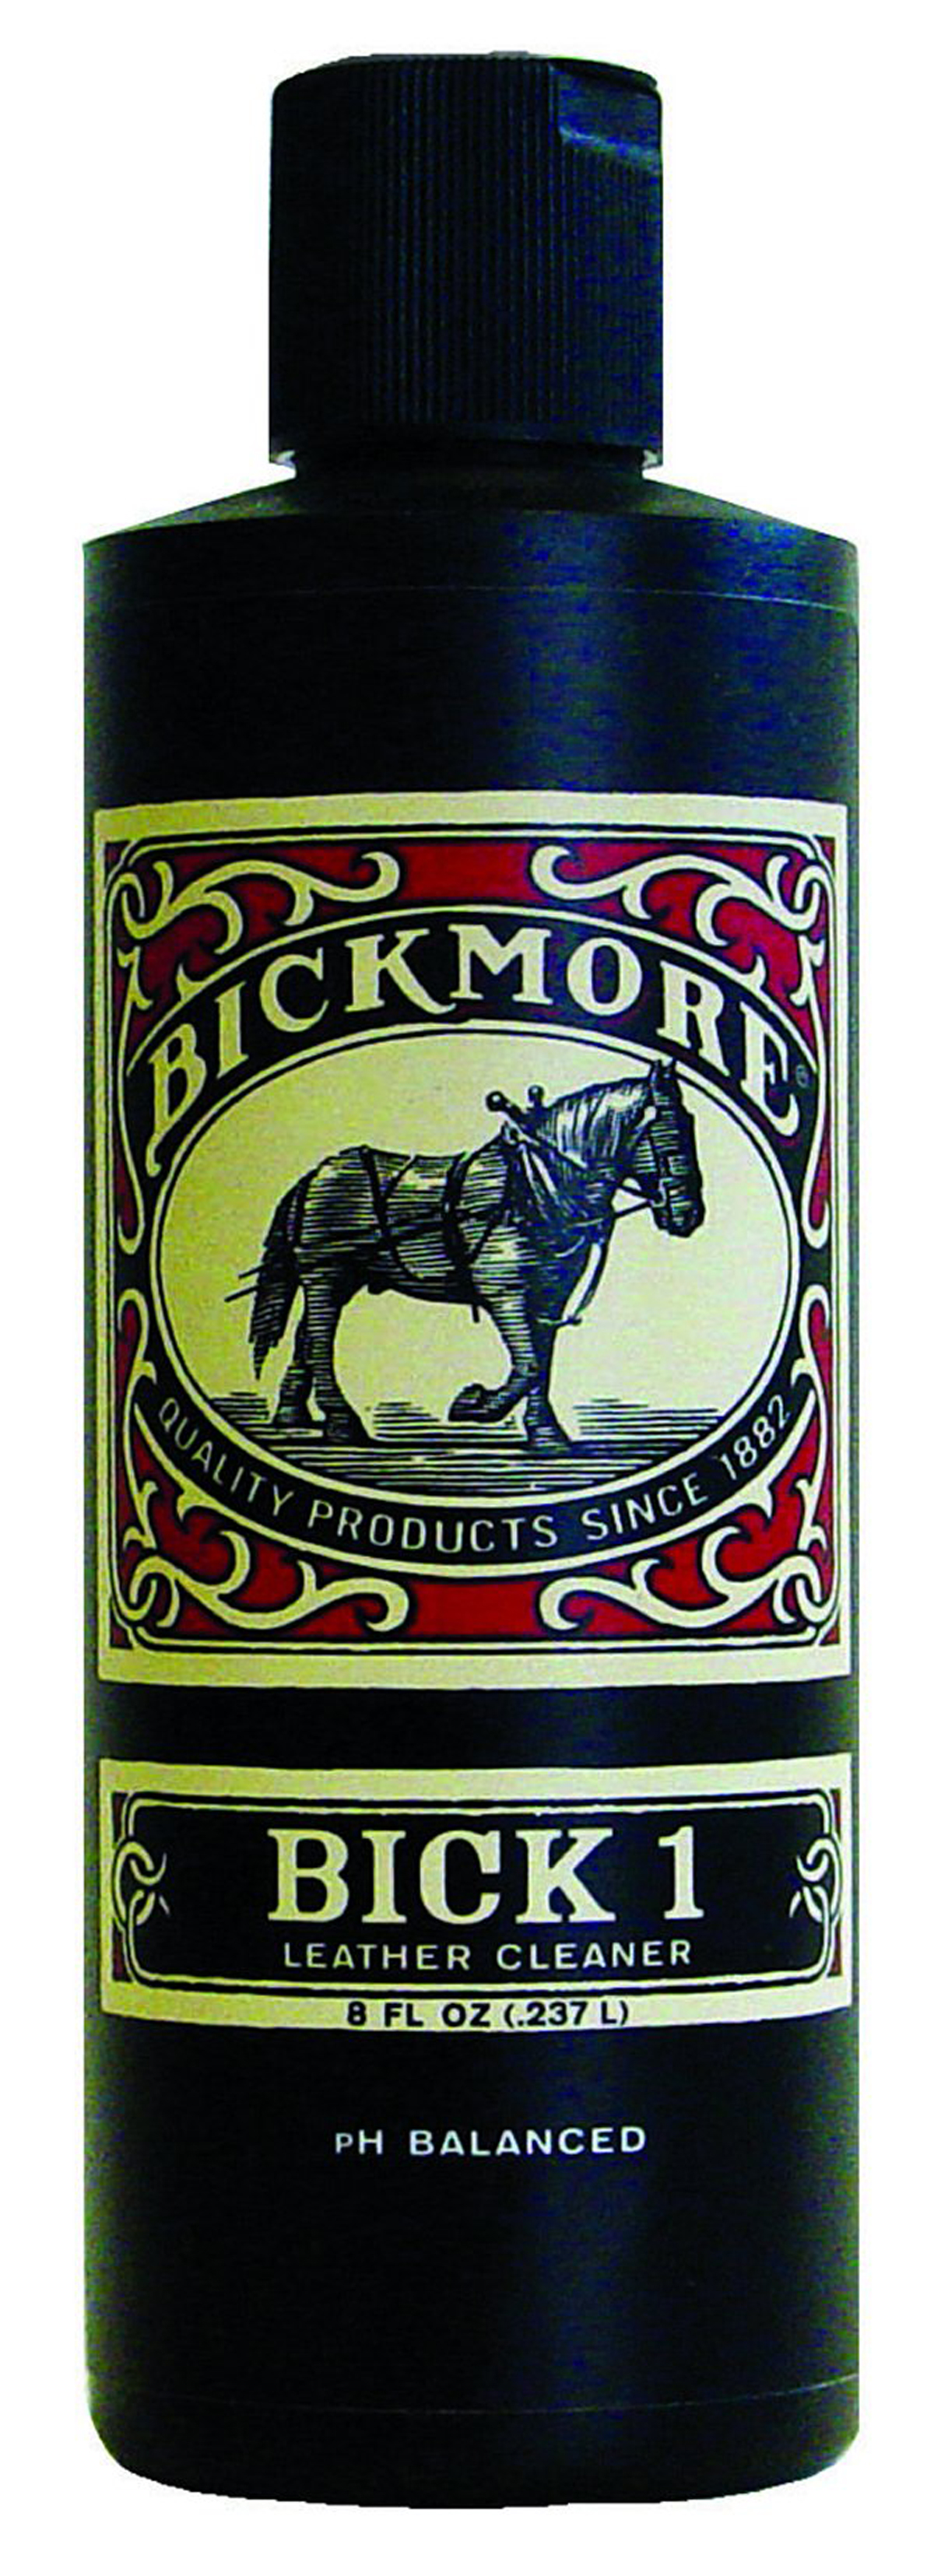 Bick 1 Leather Cleaner 8 oz